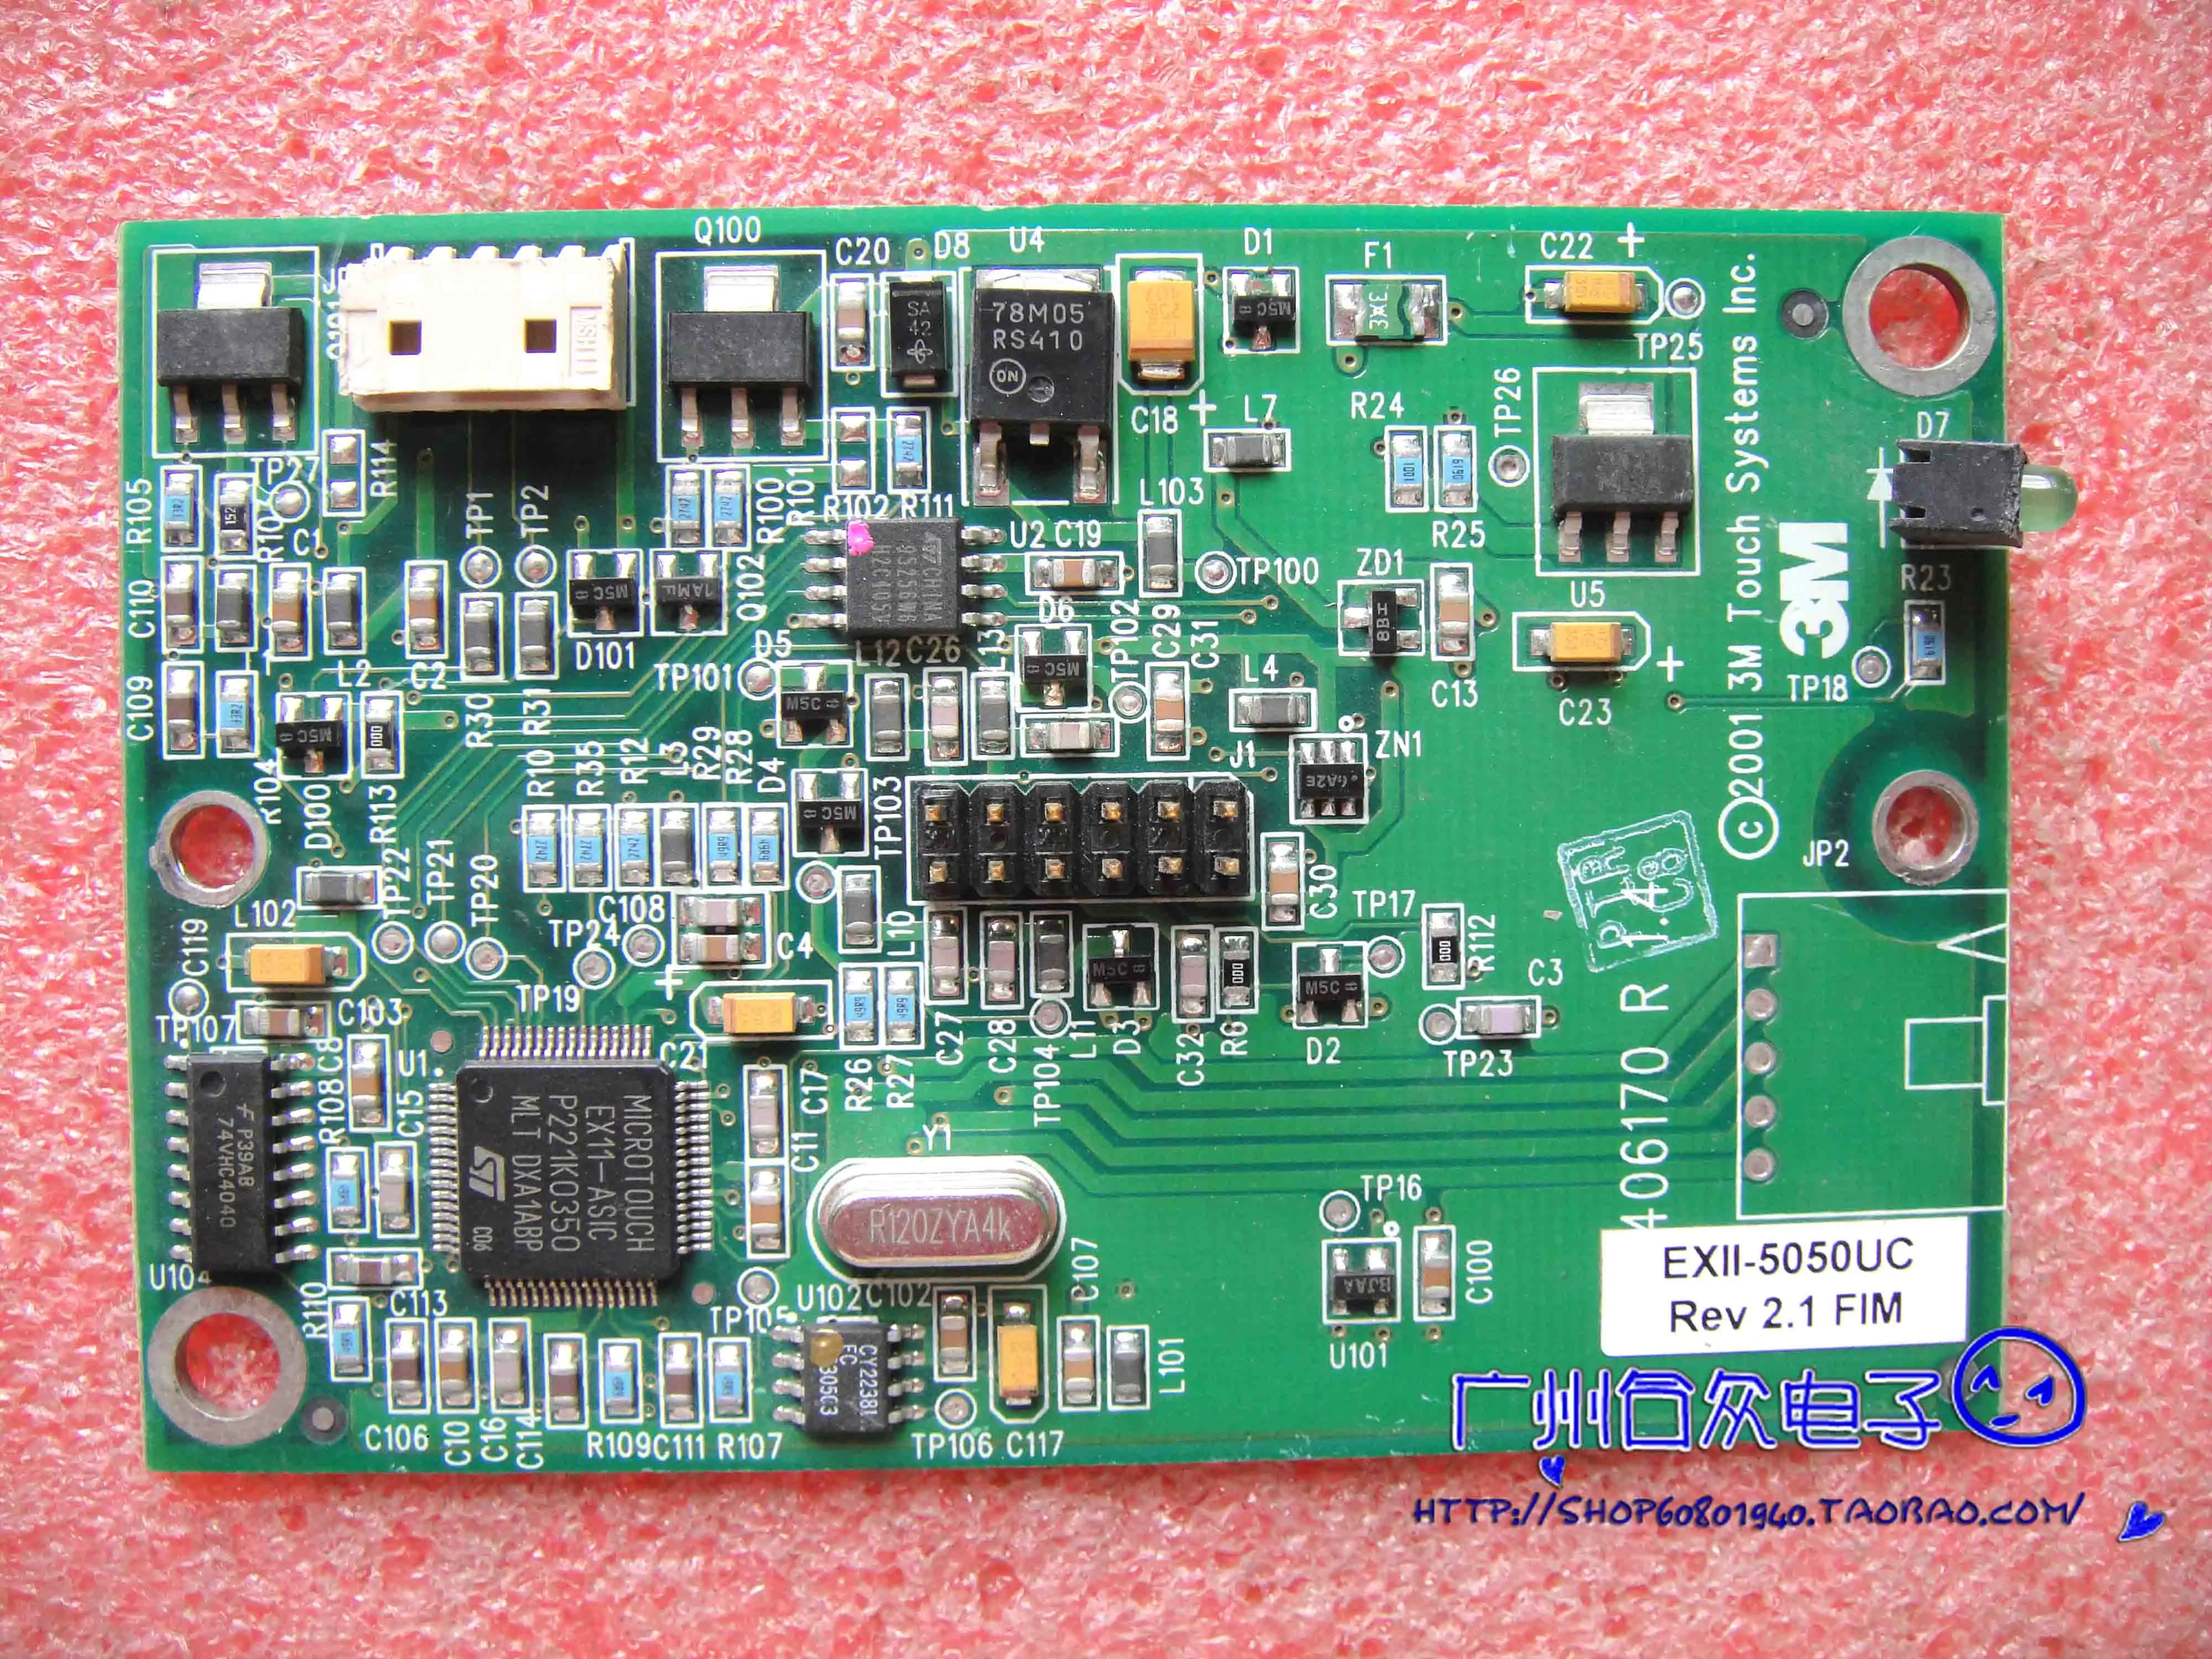 

Original 3M Touch Systems Inc 5406170 R1.4 Touch Screen Control Board EXII-5050UC